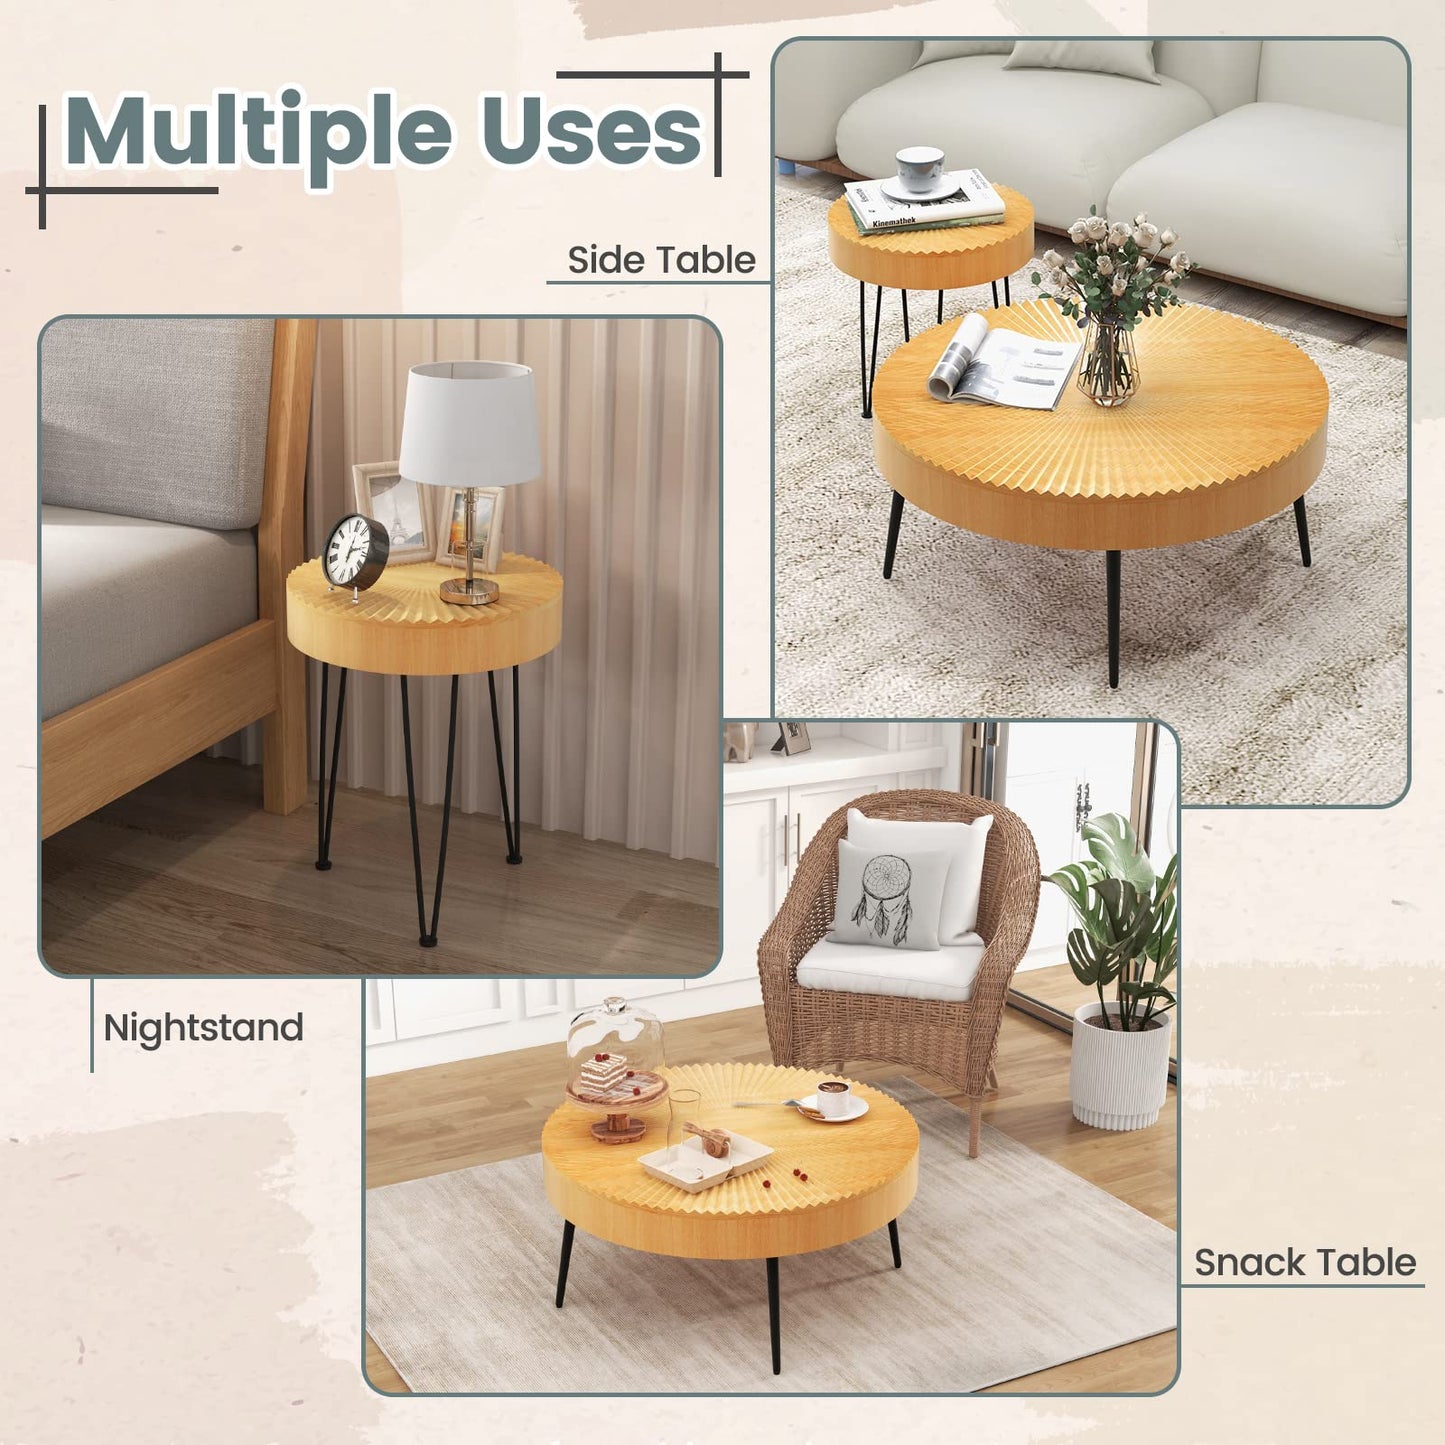 COSTWAY Farmhouse Round Coffee Table Set of 2, Rustic Sofa Side Tea Tables w/Wood Finish, Metal Frame, Adjustable Foot Pads, Nesting End Table Set for Living Room, Bedroom (Radial Pattern)